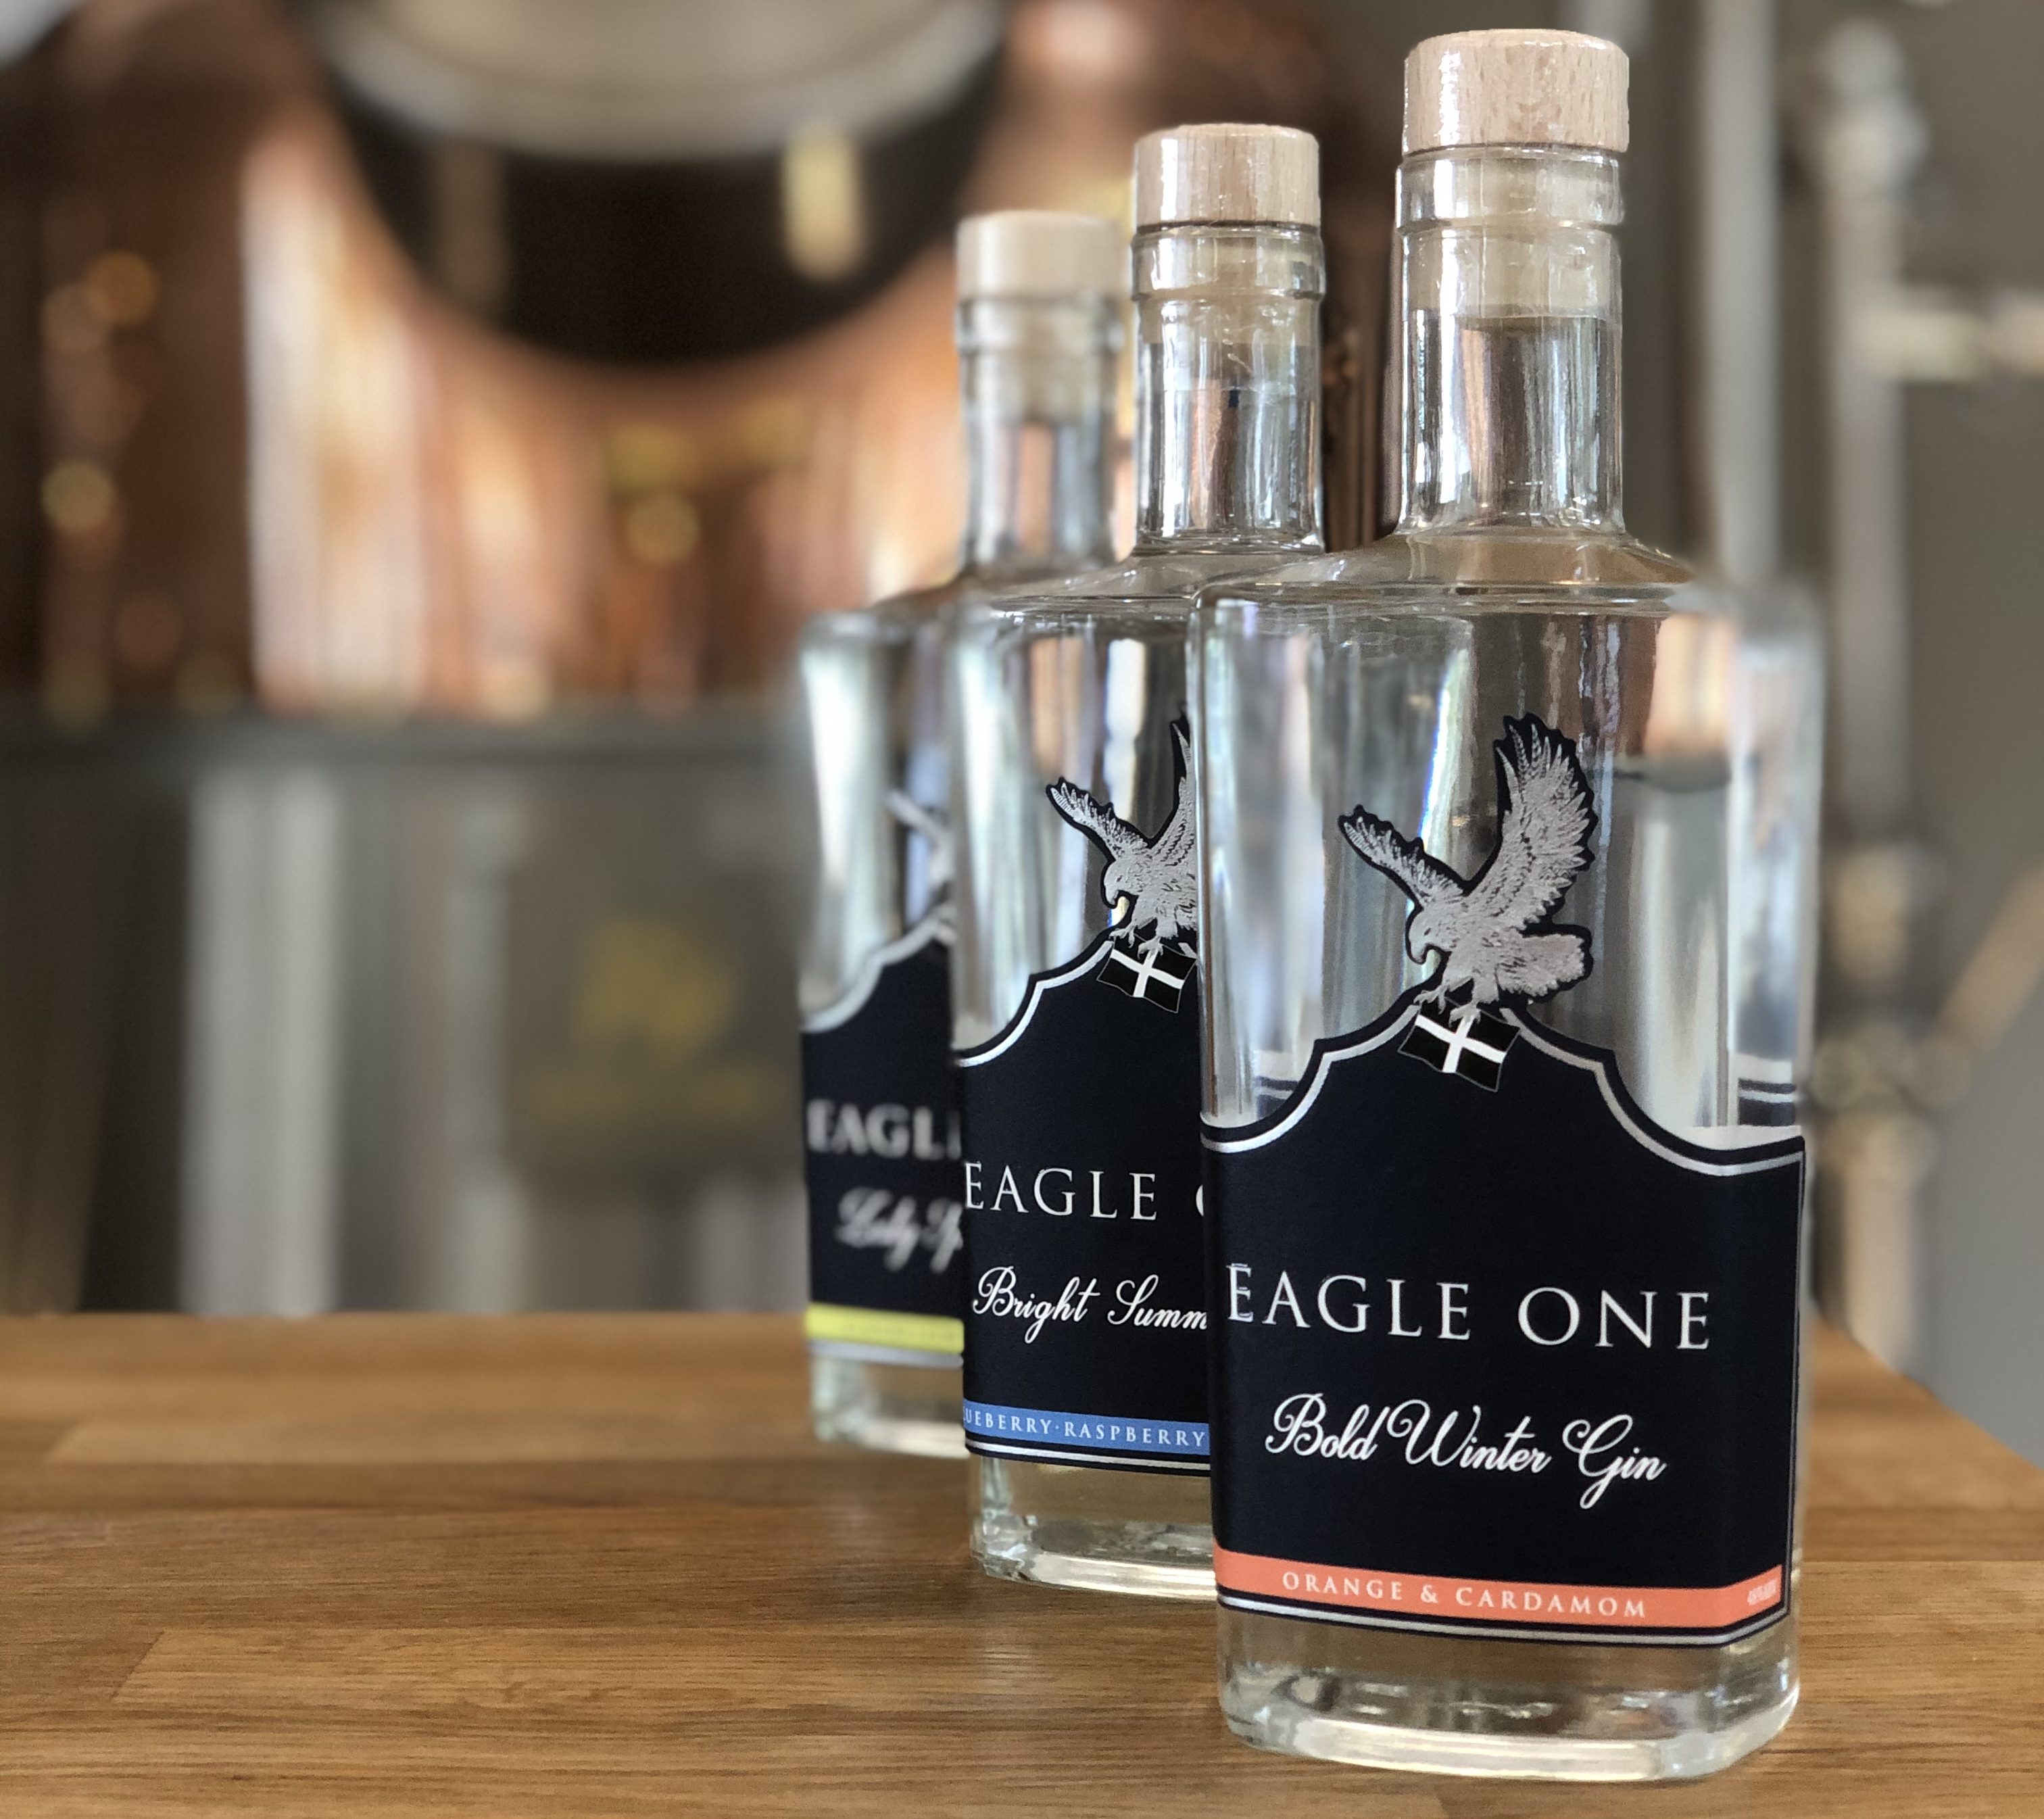 Eagle One gins from Cornwall